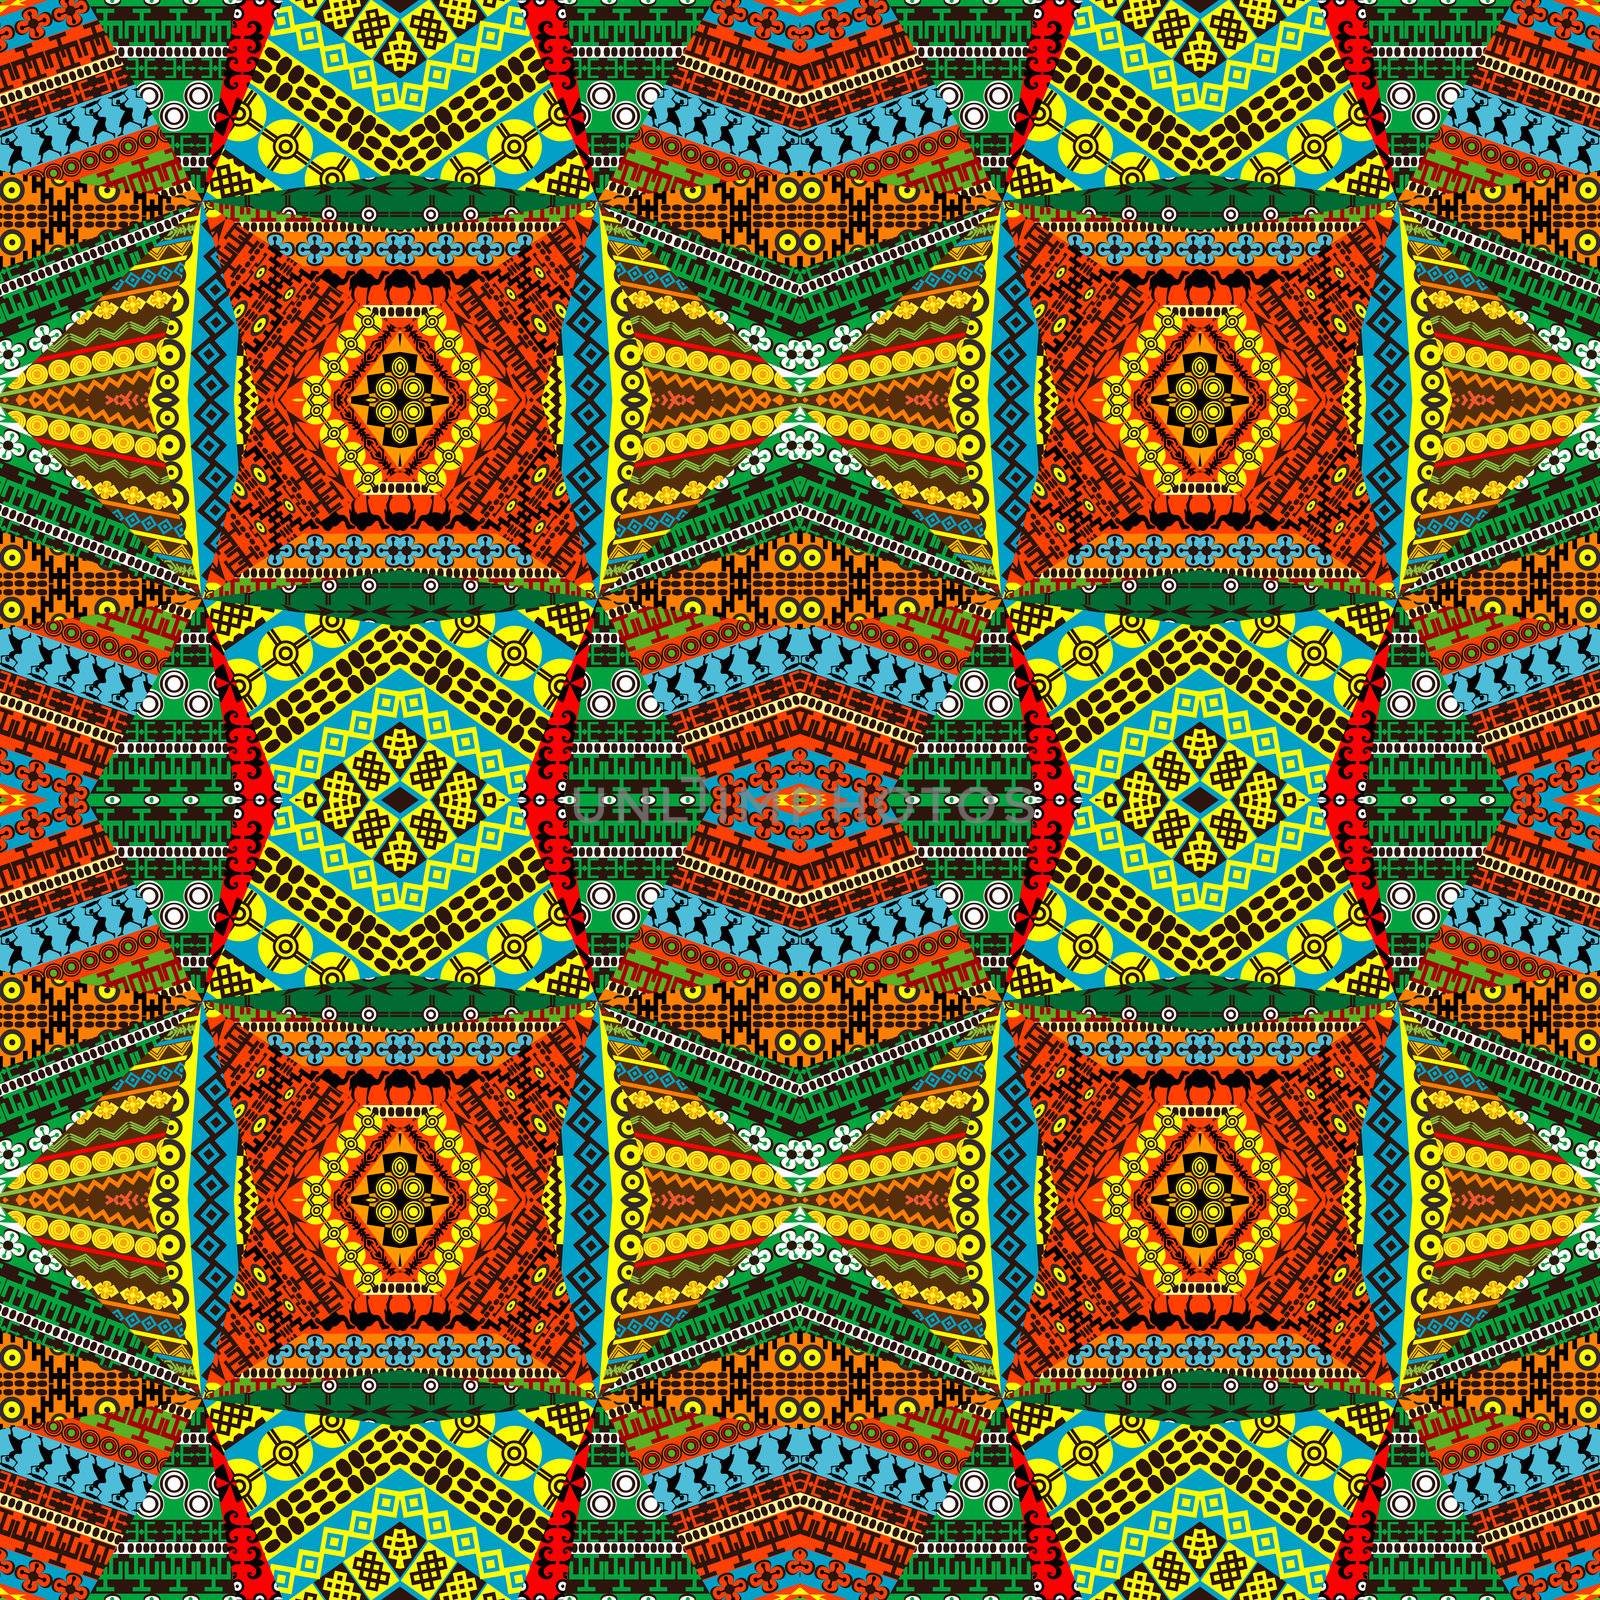 Collage made of African motifs, textile patchworks by hibrida13